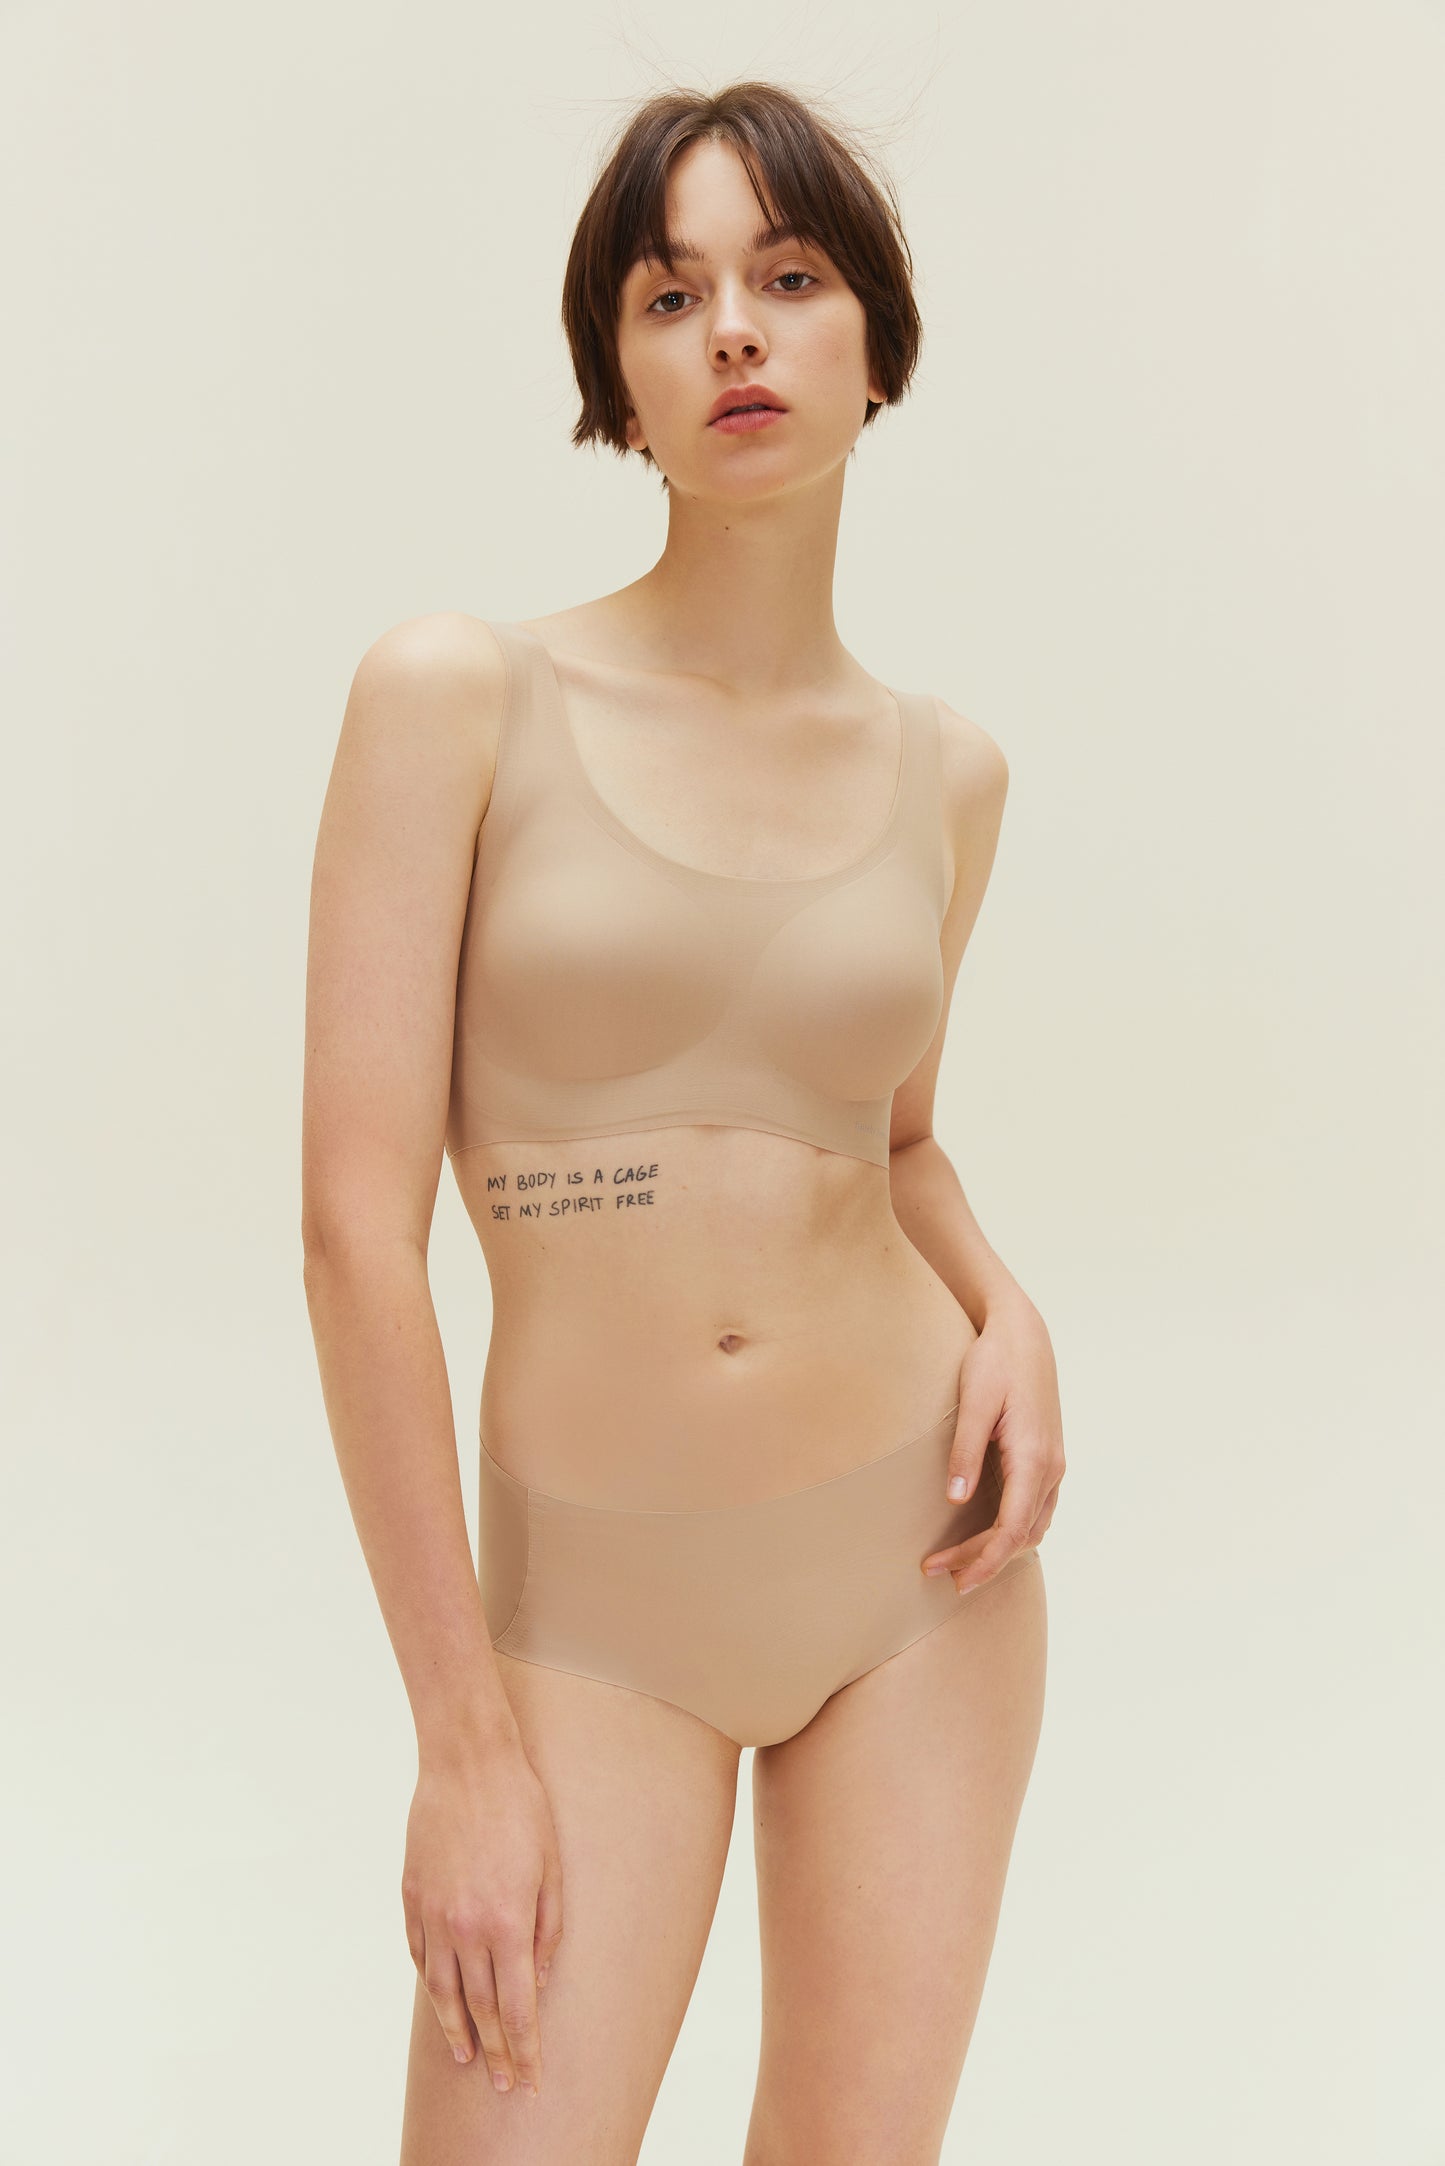 woman wearing nude color bra and brief